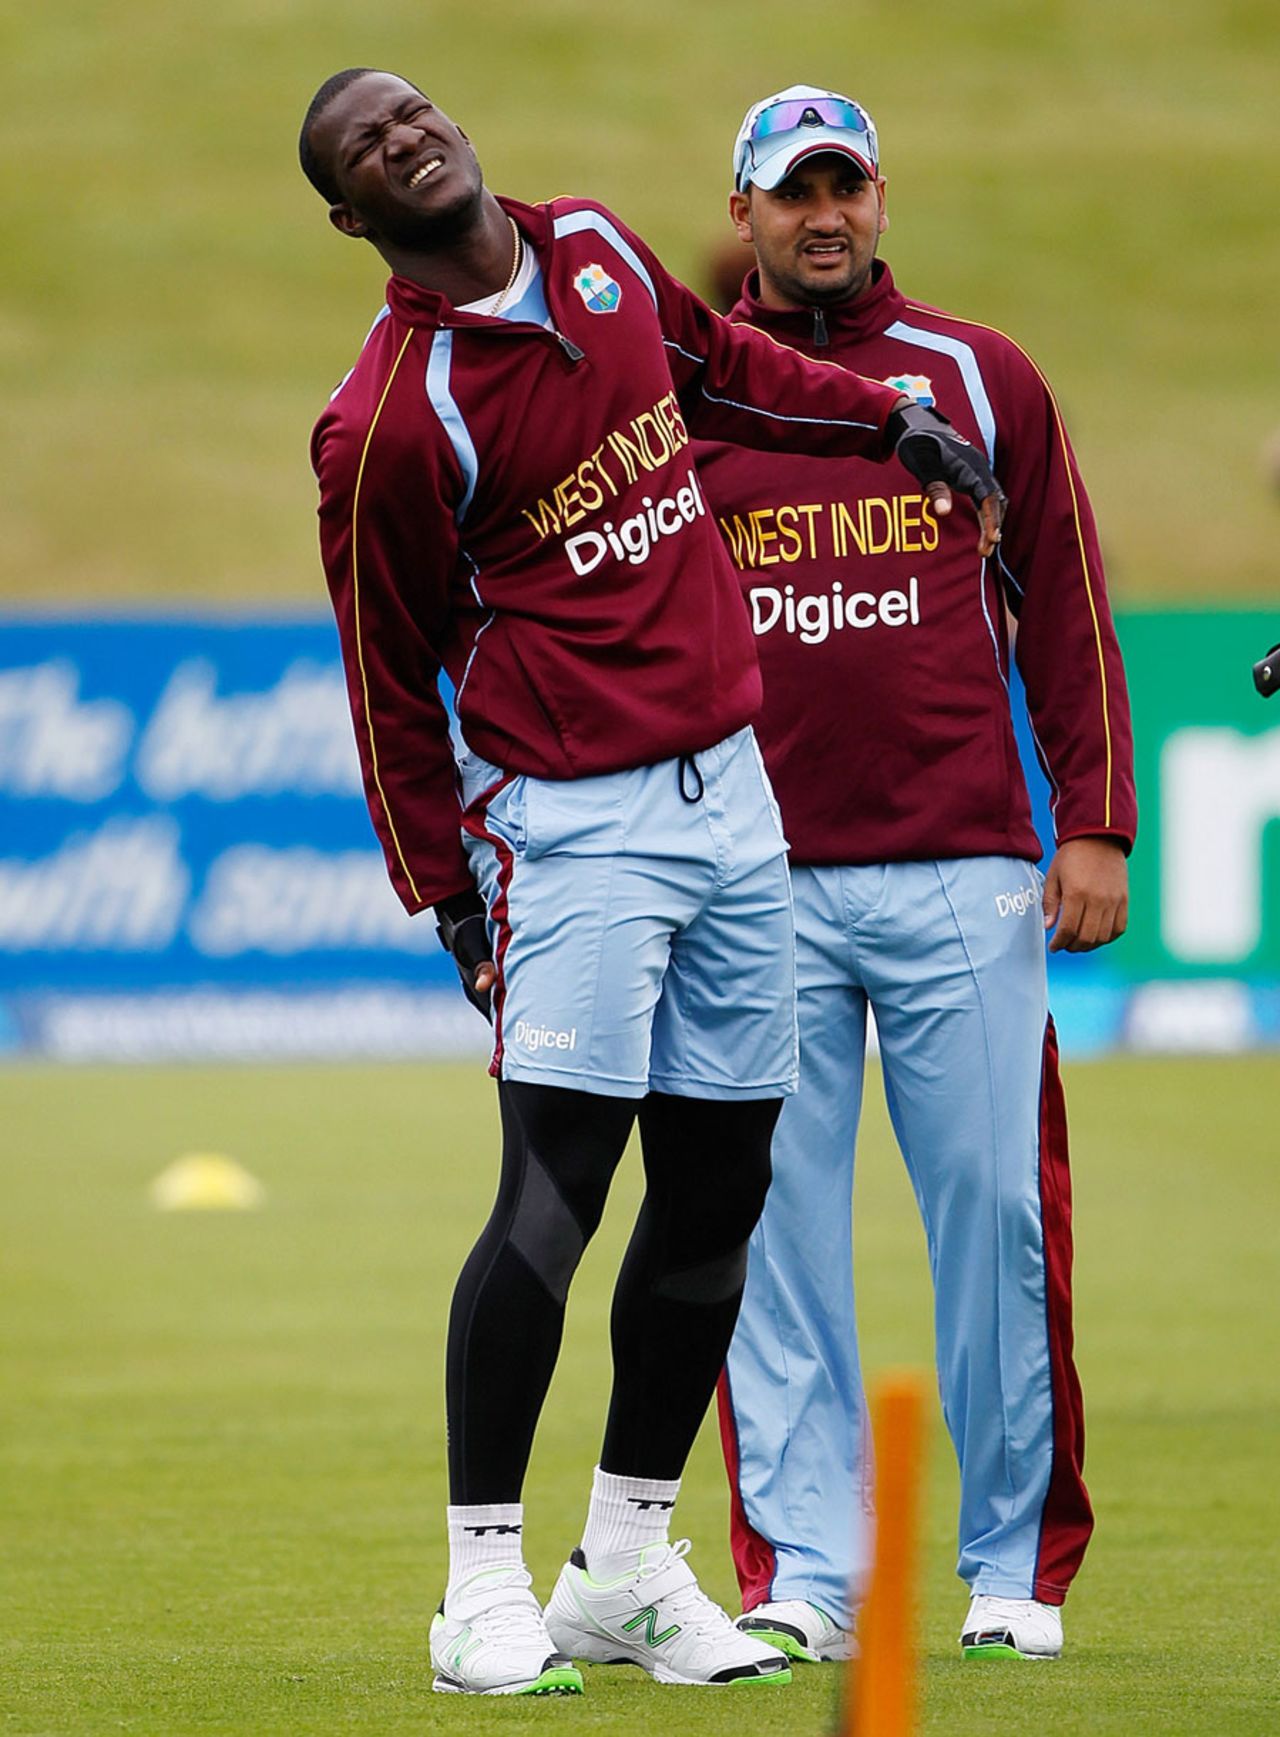 Darren Sammy strained his hamstring during training, New Zealand v West Indies, 3rd ODI, Queenstown, January 1, 2014